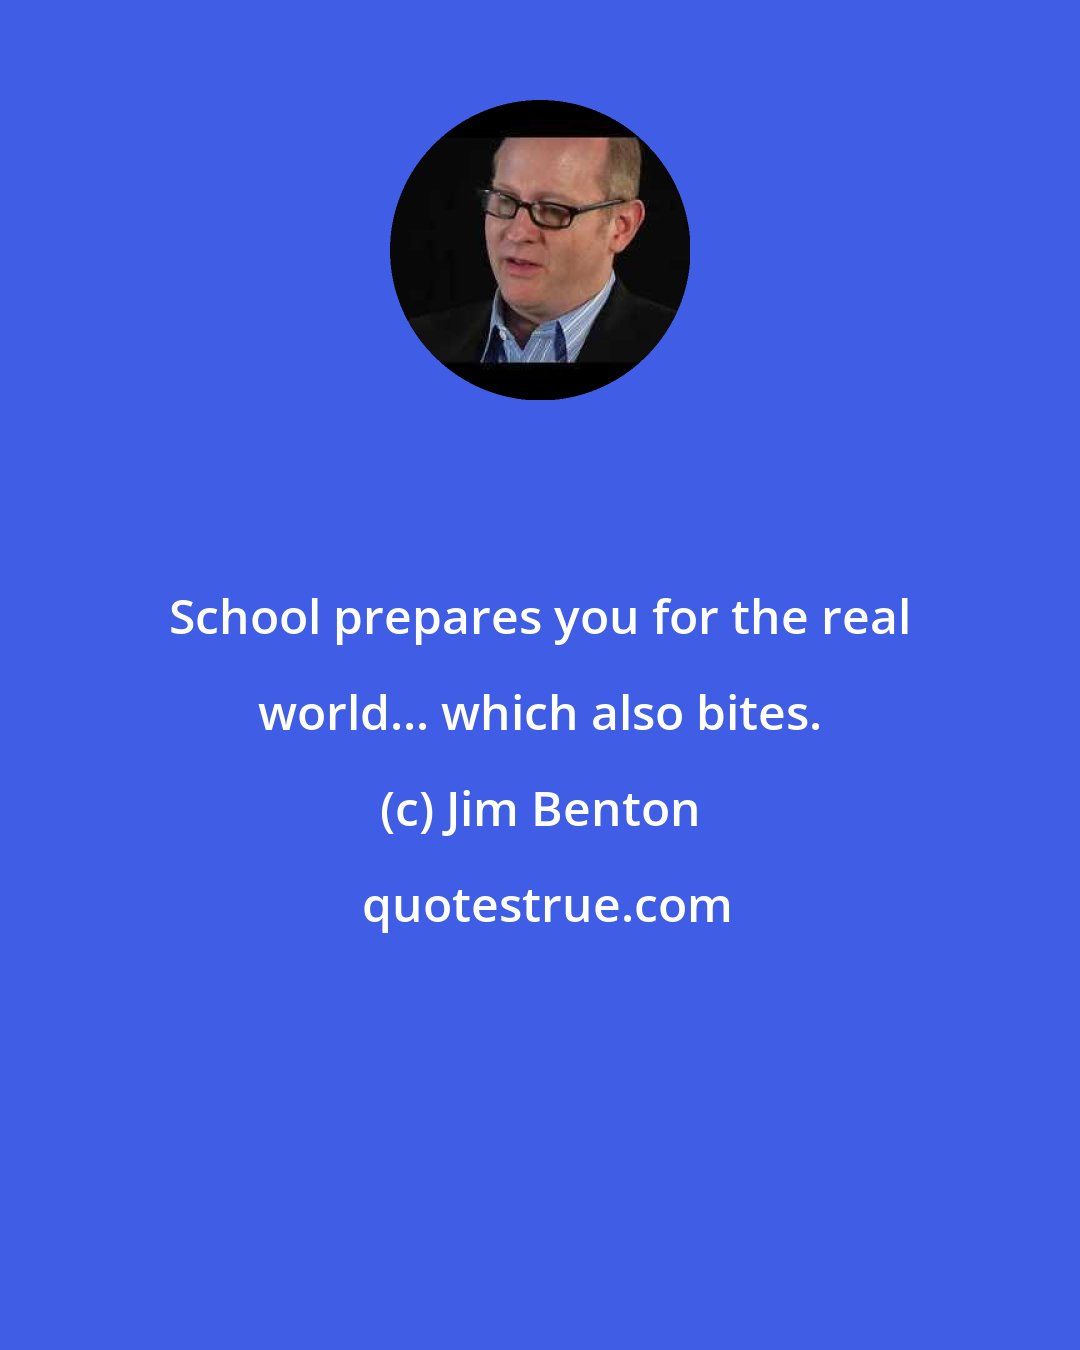 Jim Benton: School prepares you for the real world... which also bites.